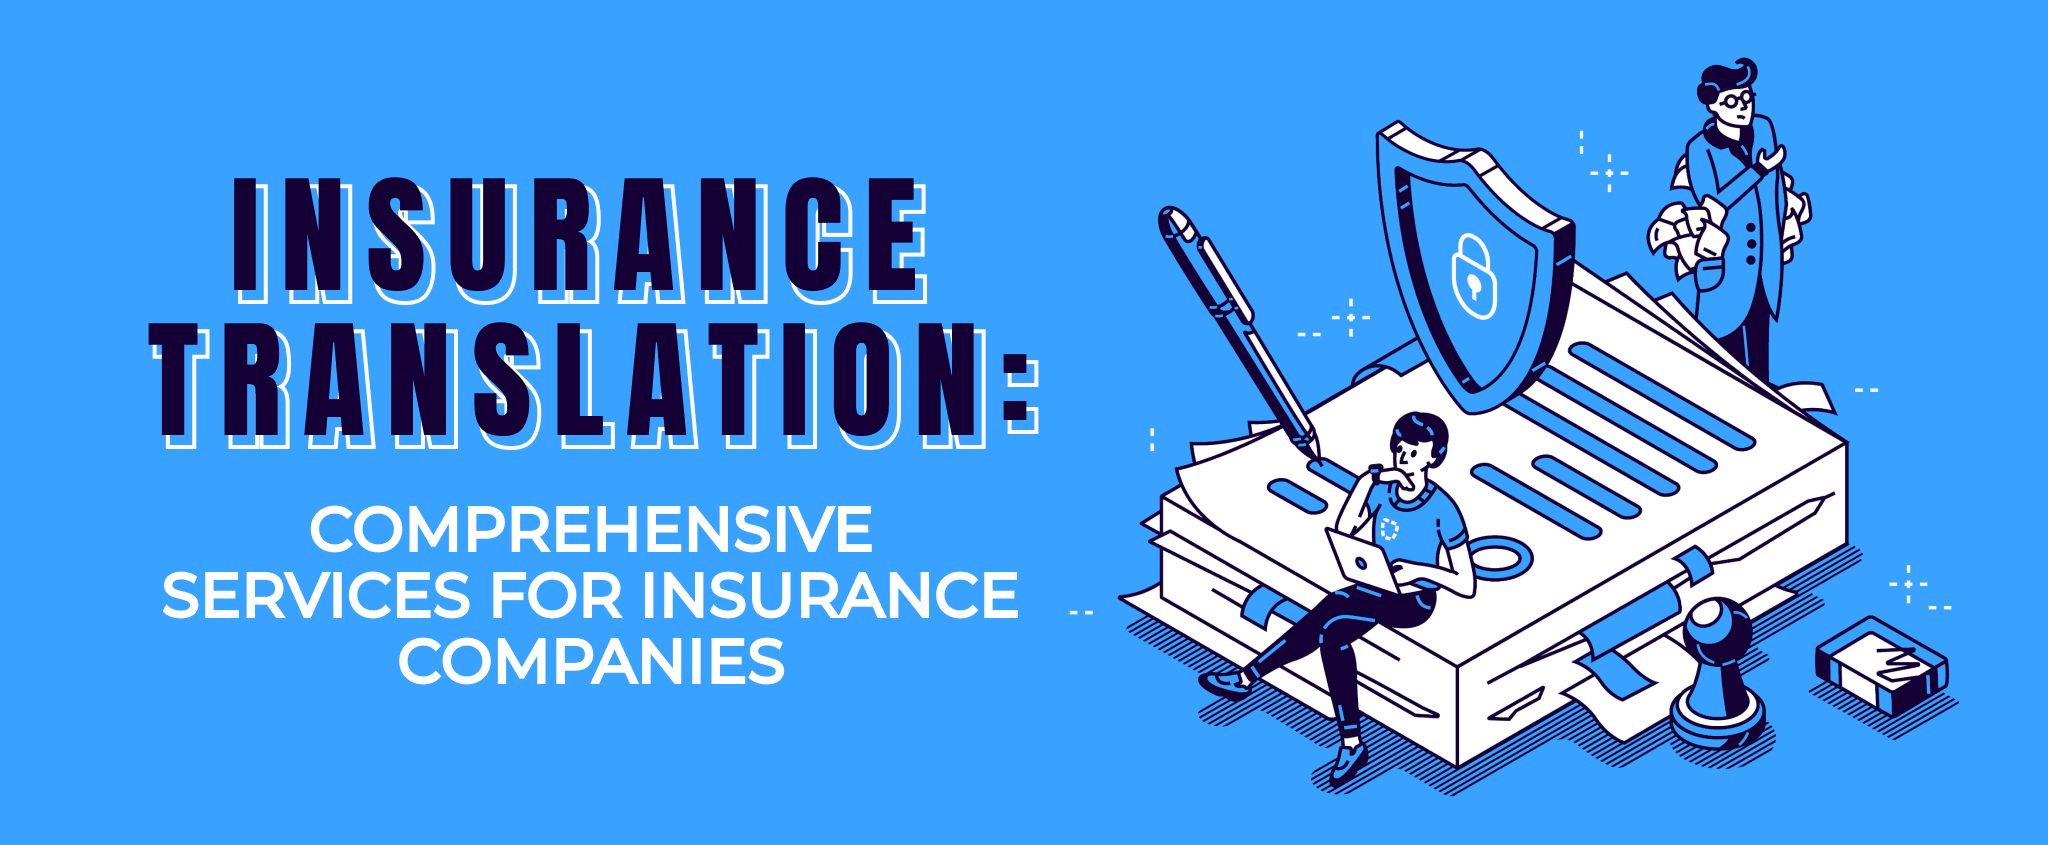 Insurance Translation - Comprehensive Services for Insurance Companies